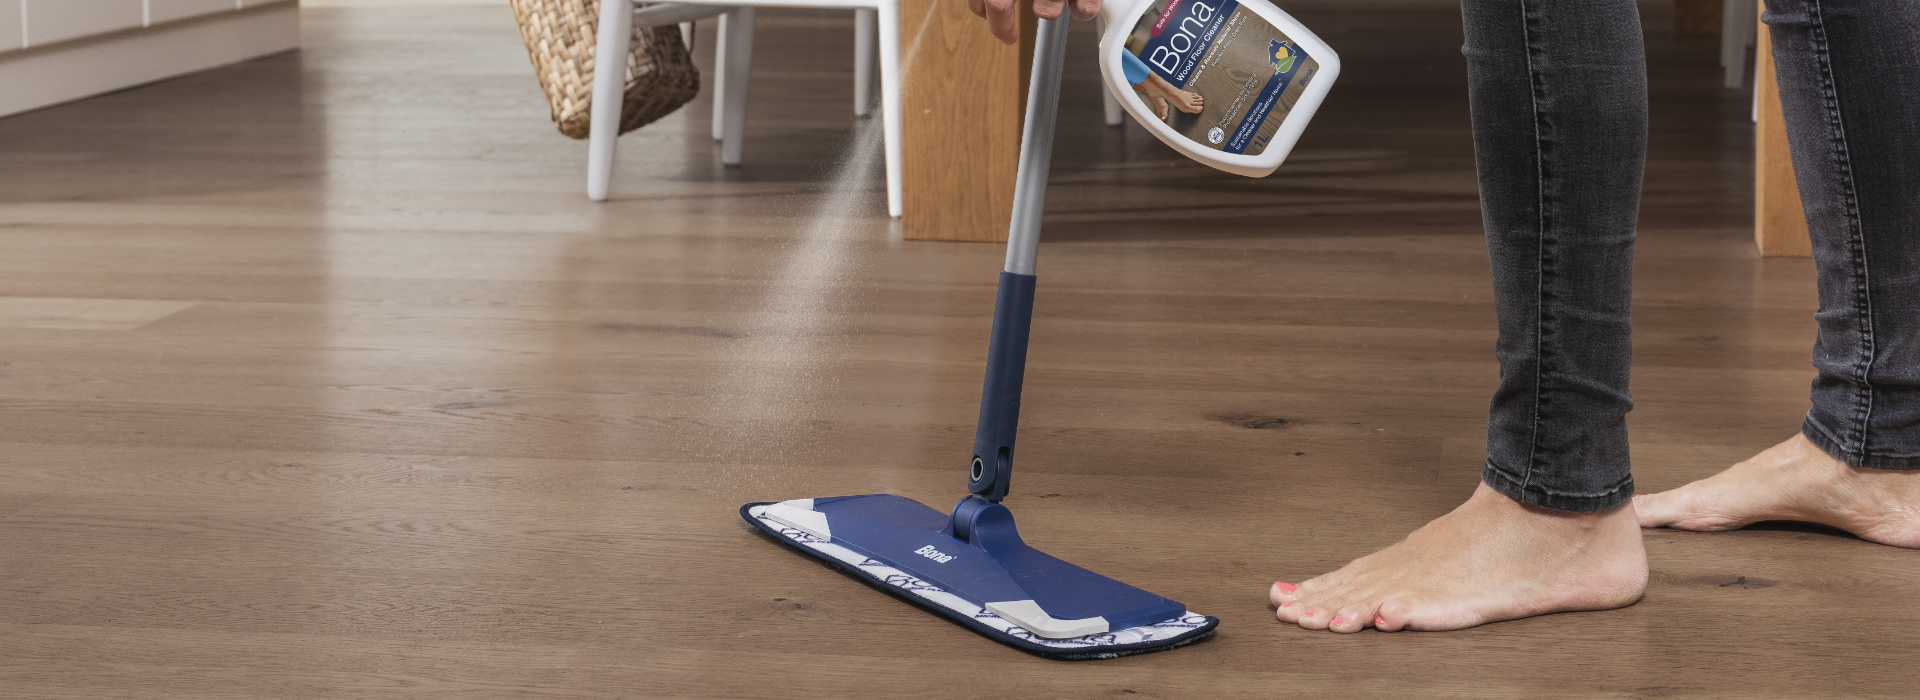 How To Use Bona Cleaning and Maintenance Products? - ESB Flooring